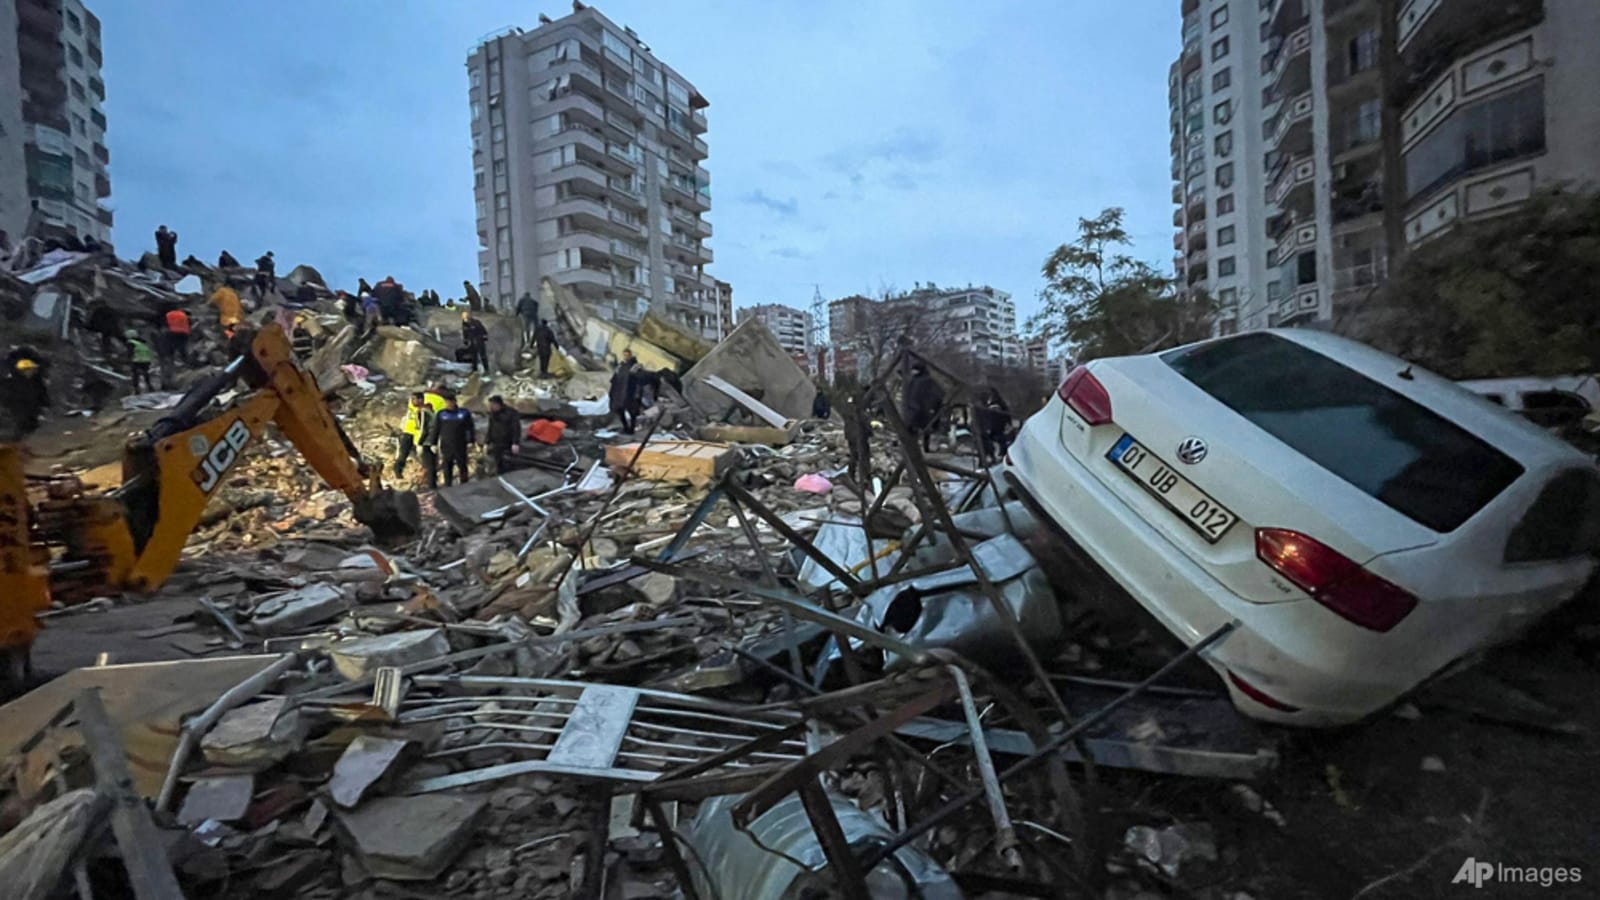 thai-student-affected-by-turkiye-quake-turns-'hard-time'-into-opportunity-to-help-other-survivors